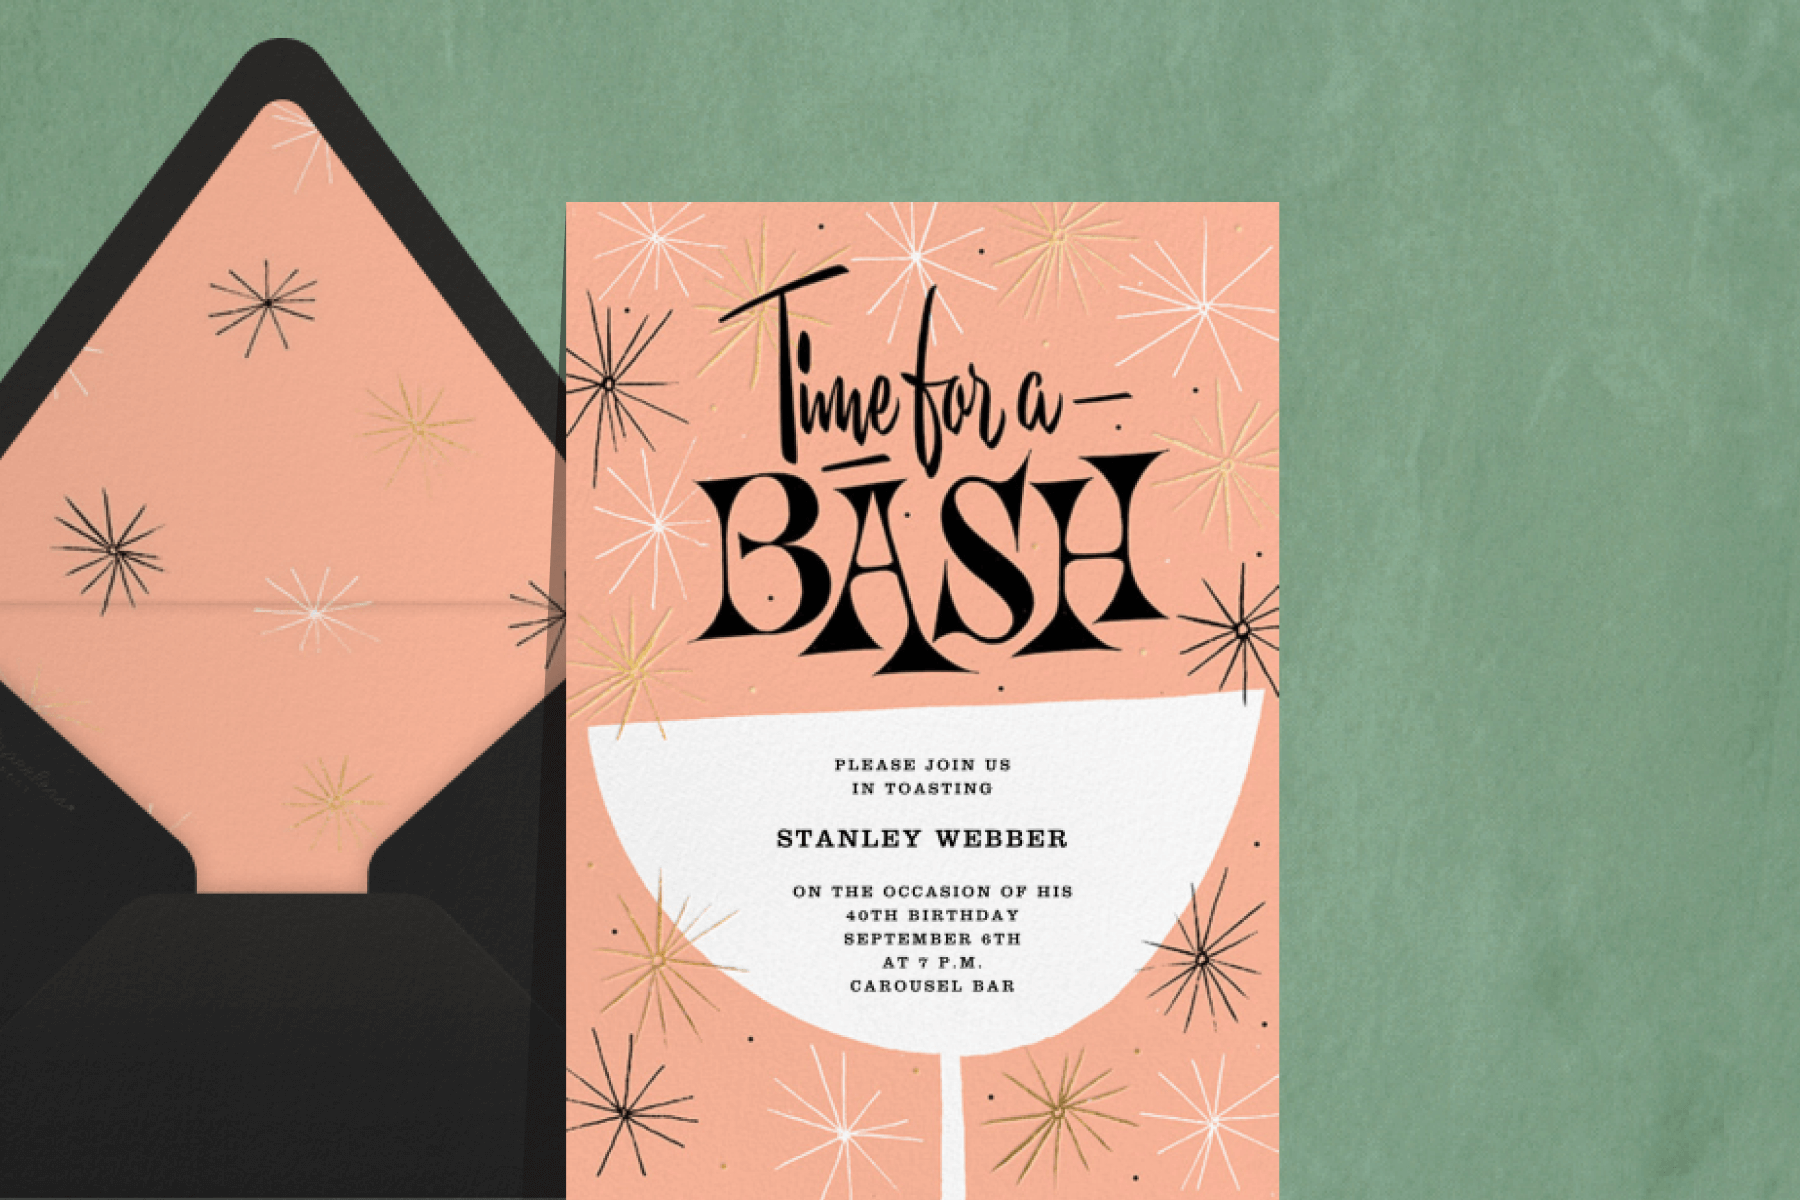 An adult birthday invitation featuring a pink midcentury design that reads “time for a bash.”